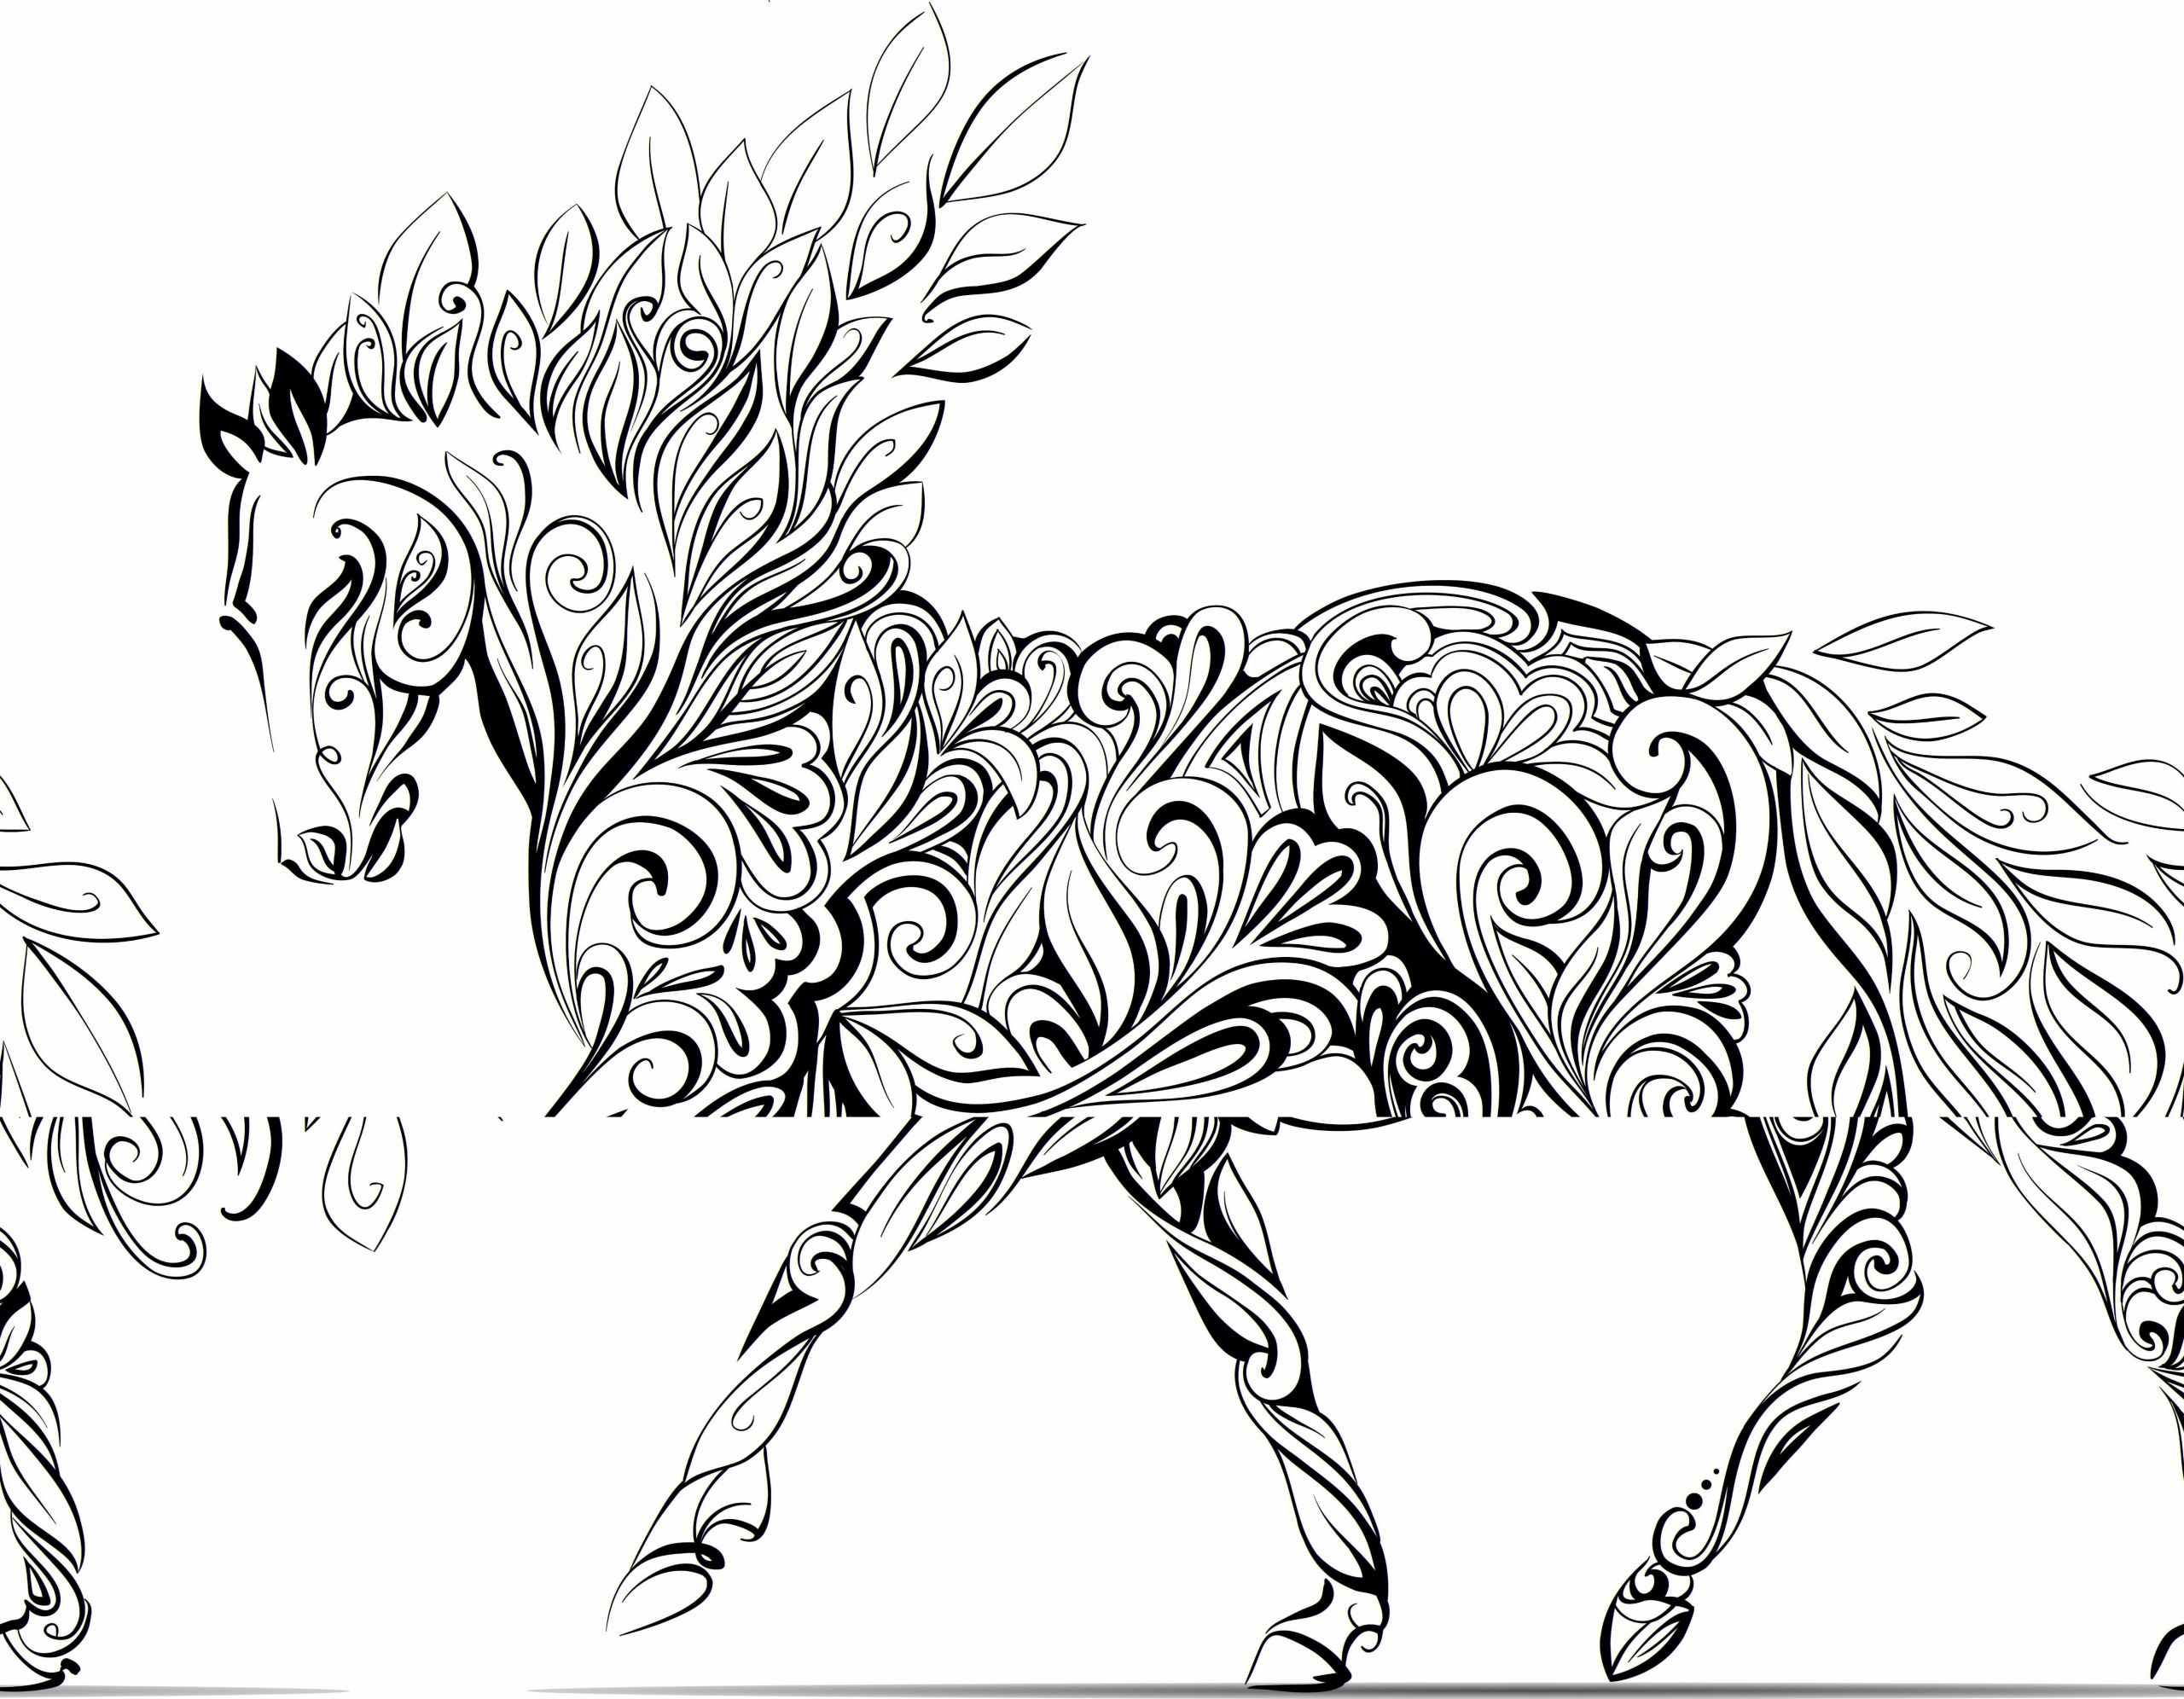 Adult Coloring Book Horse
 adult horse coloring pages children a to color wallpapers